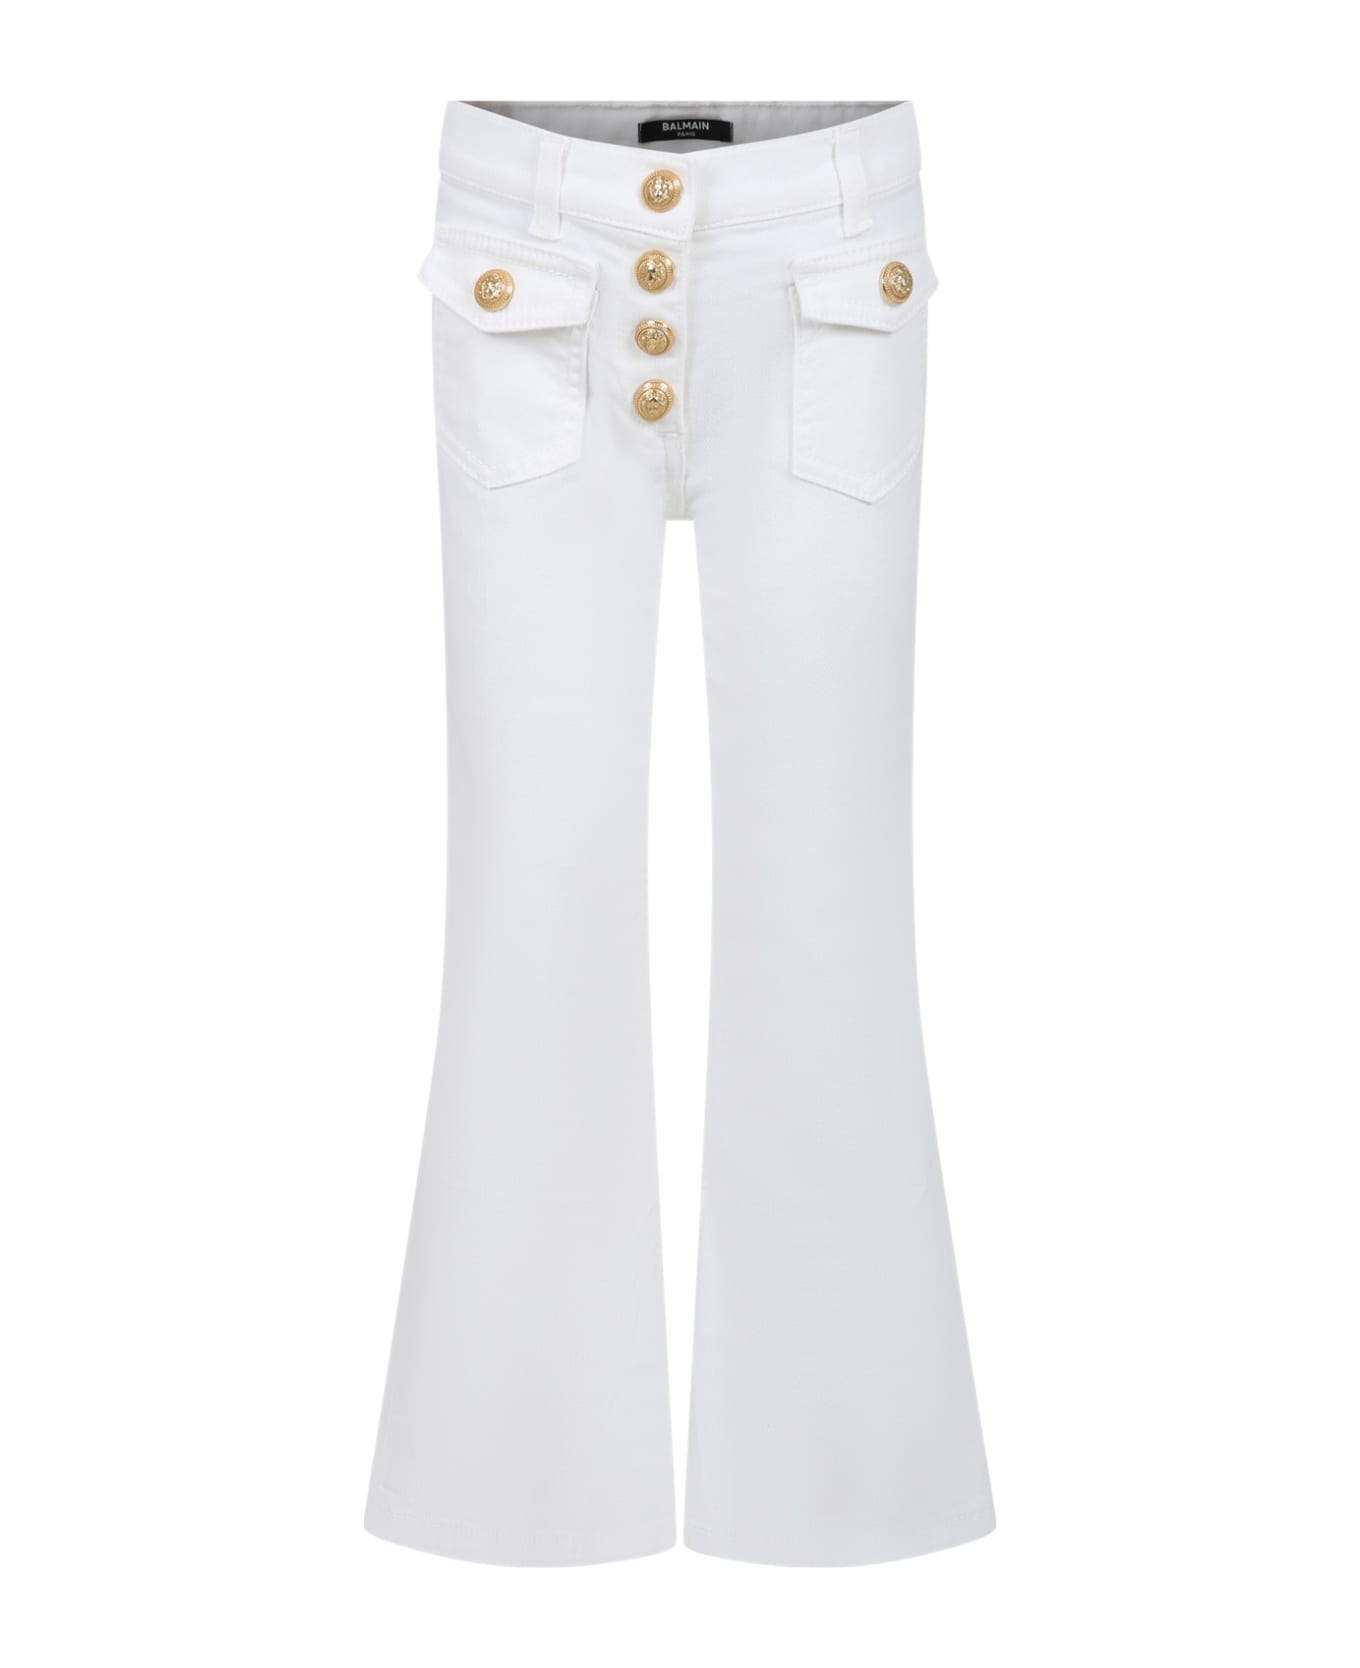 Balmain White Jeans For Girl With Gold Buttons - White